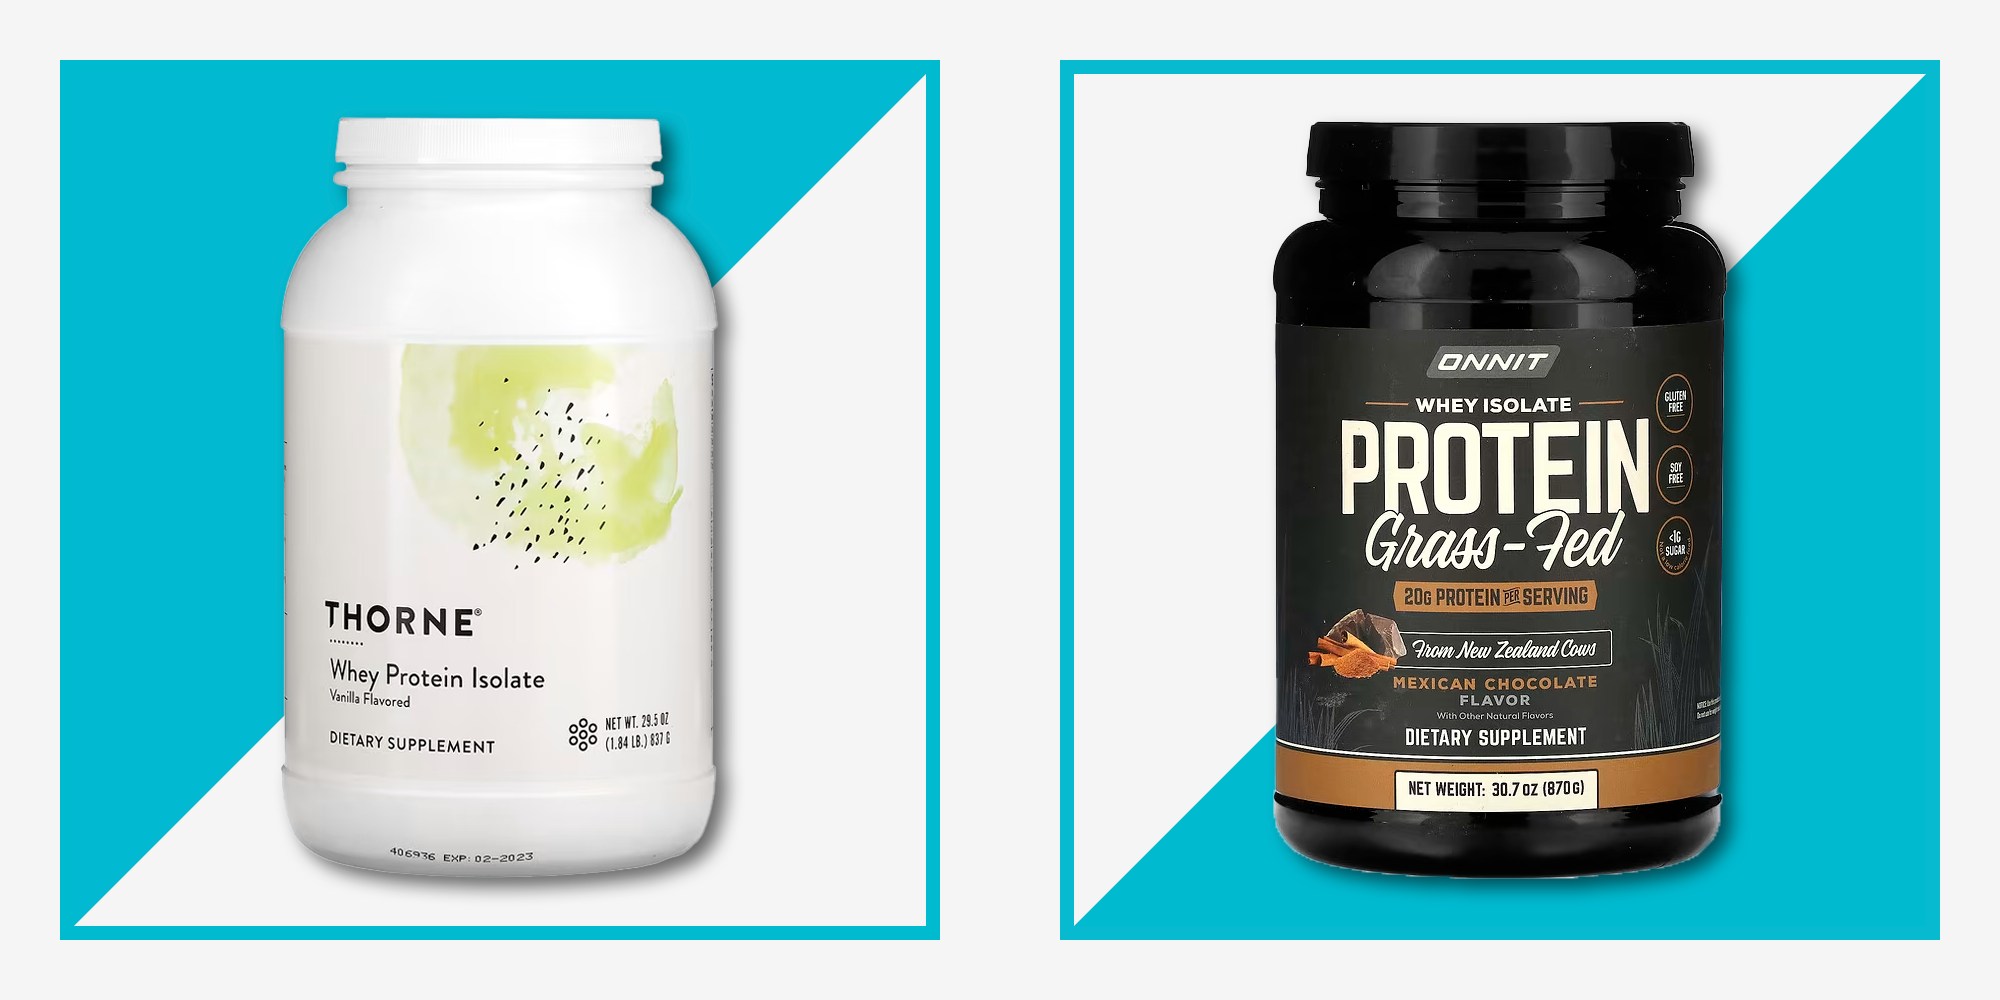 Are protein powder and gym supplements for weight loss safe? Find